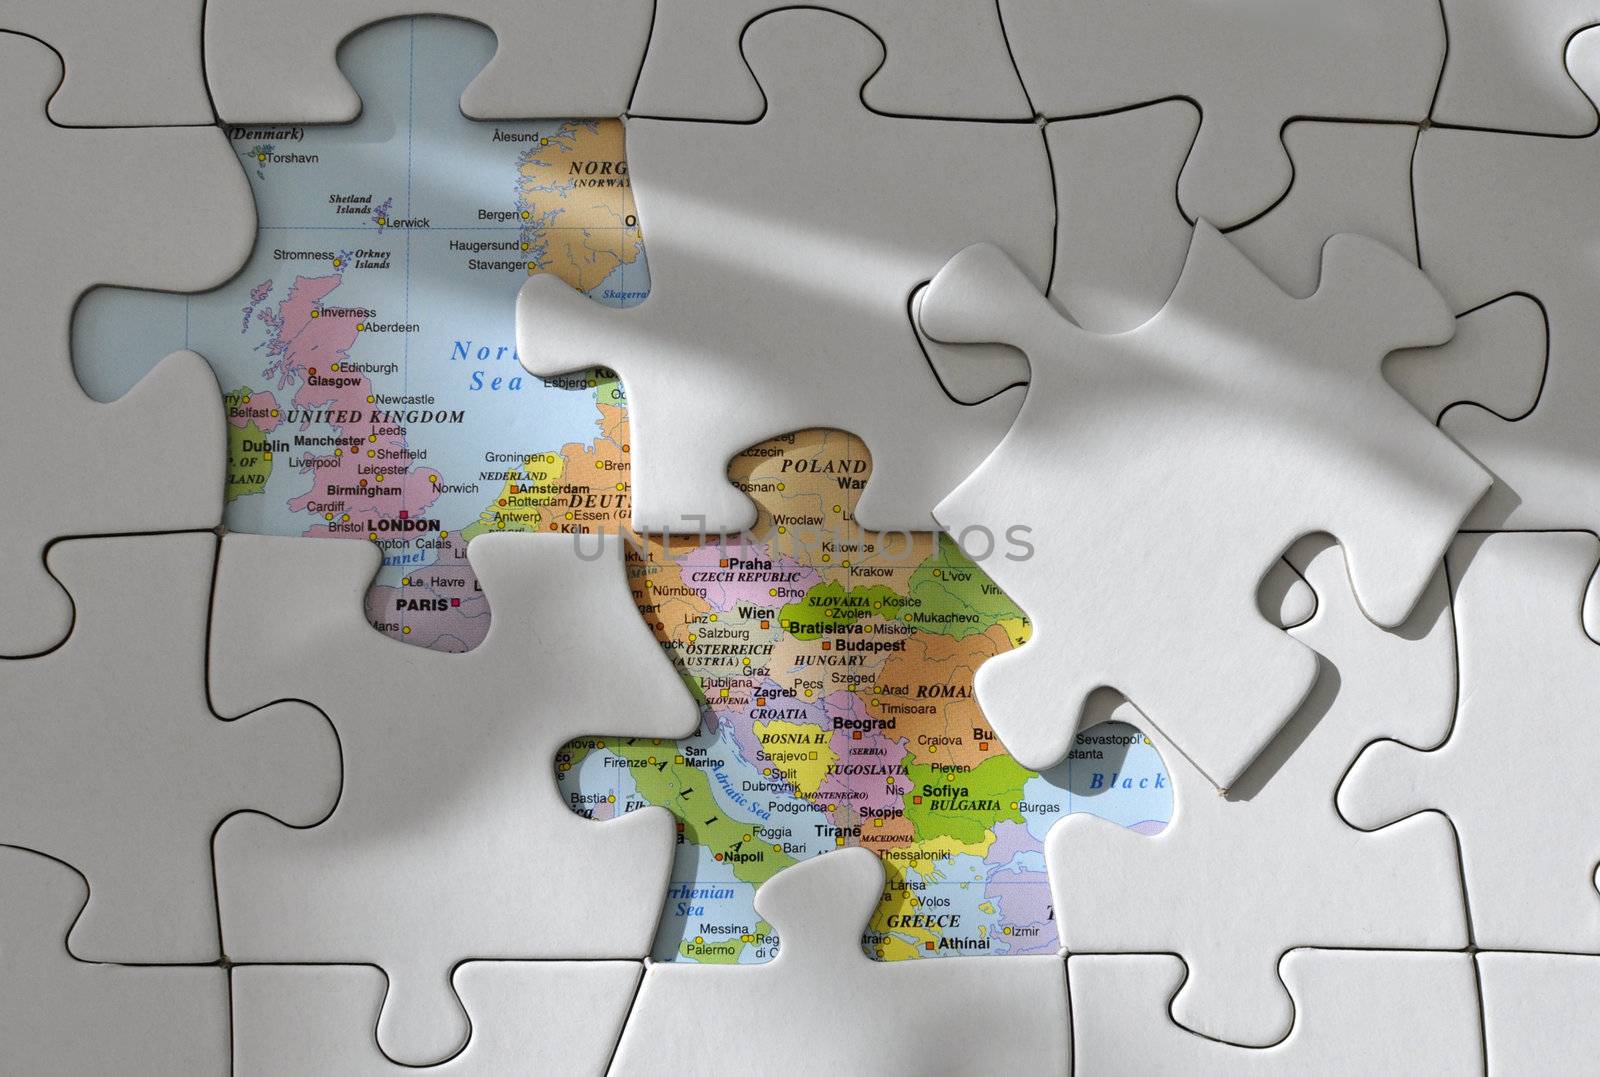 Missing pieces from a jigsaw puzzle with a map of Europe underneath